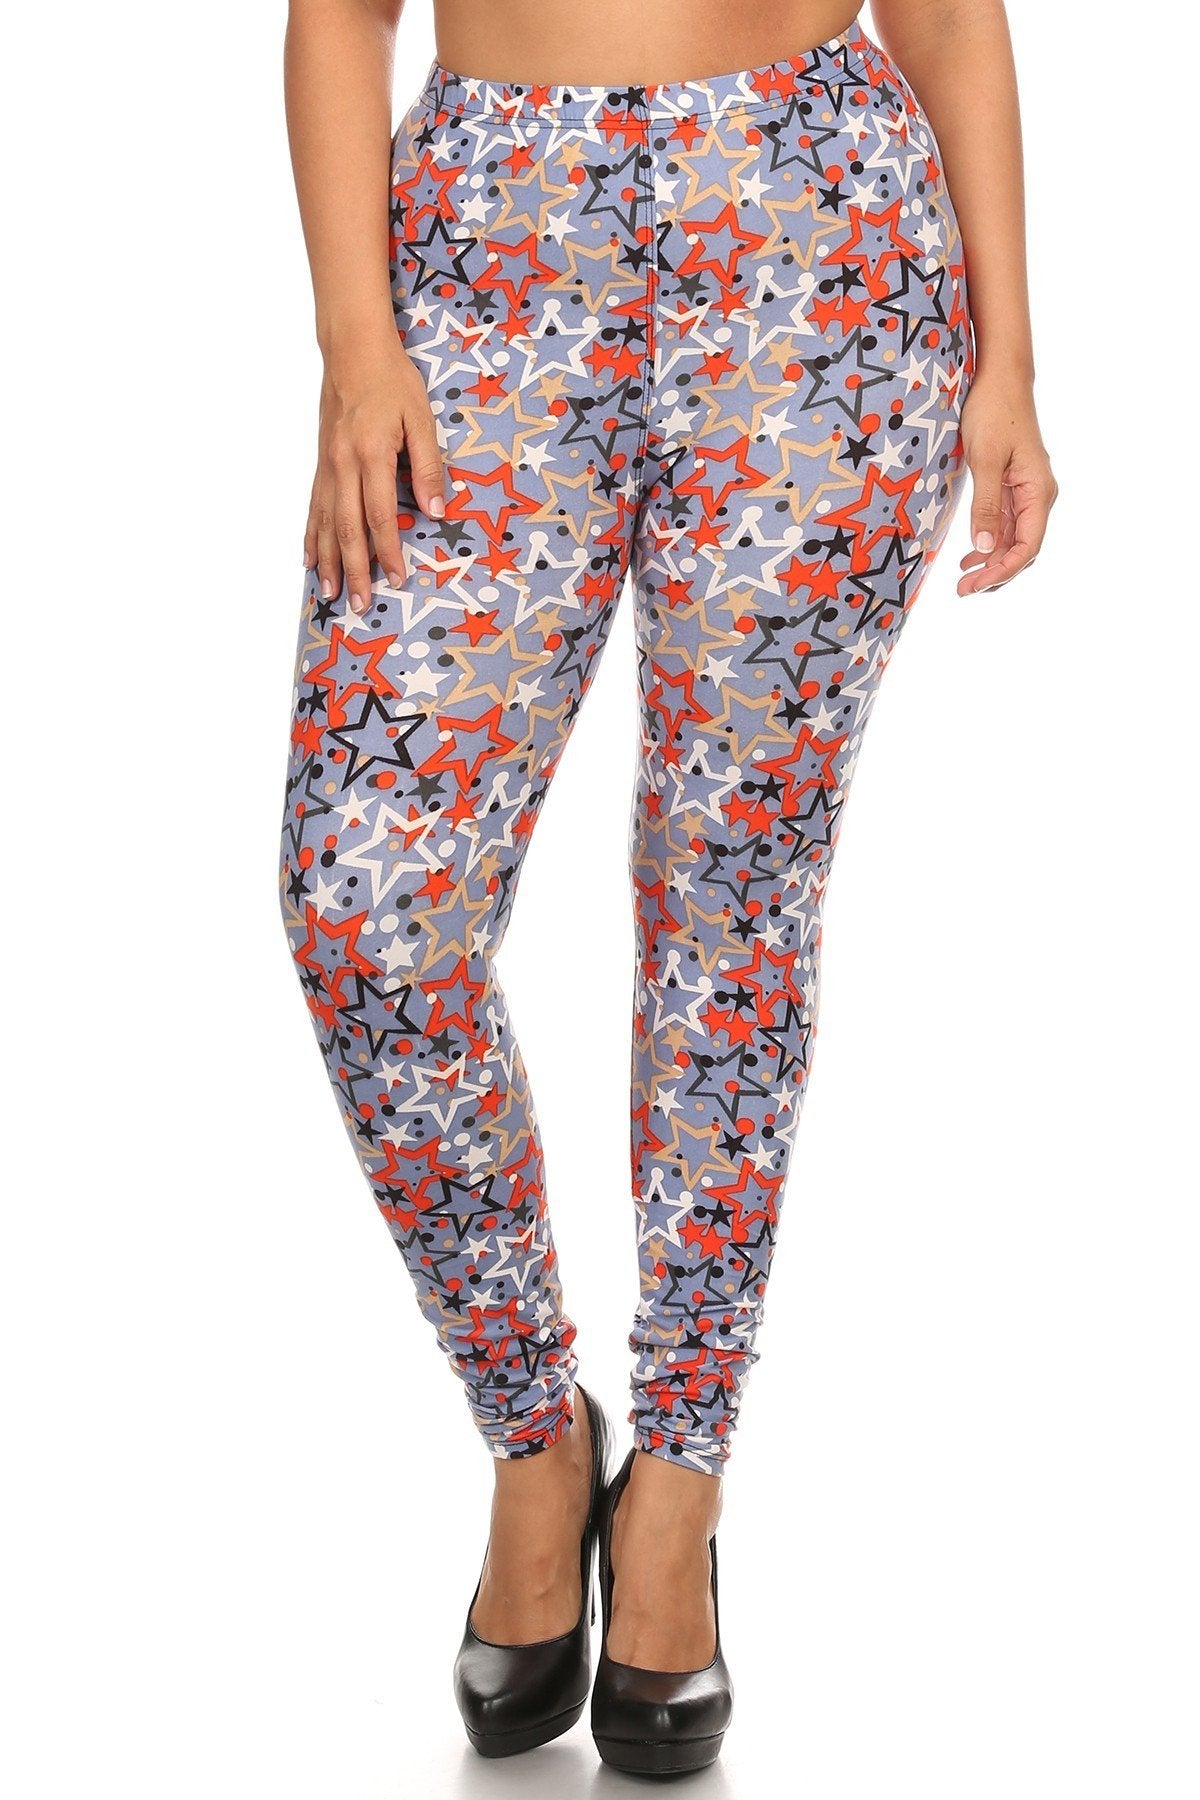 Plus Star Print, Full Length Leggings In A Slim Fitting Style With A Banded High Waist